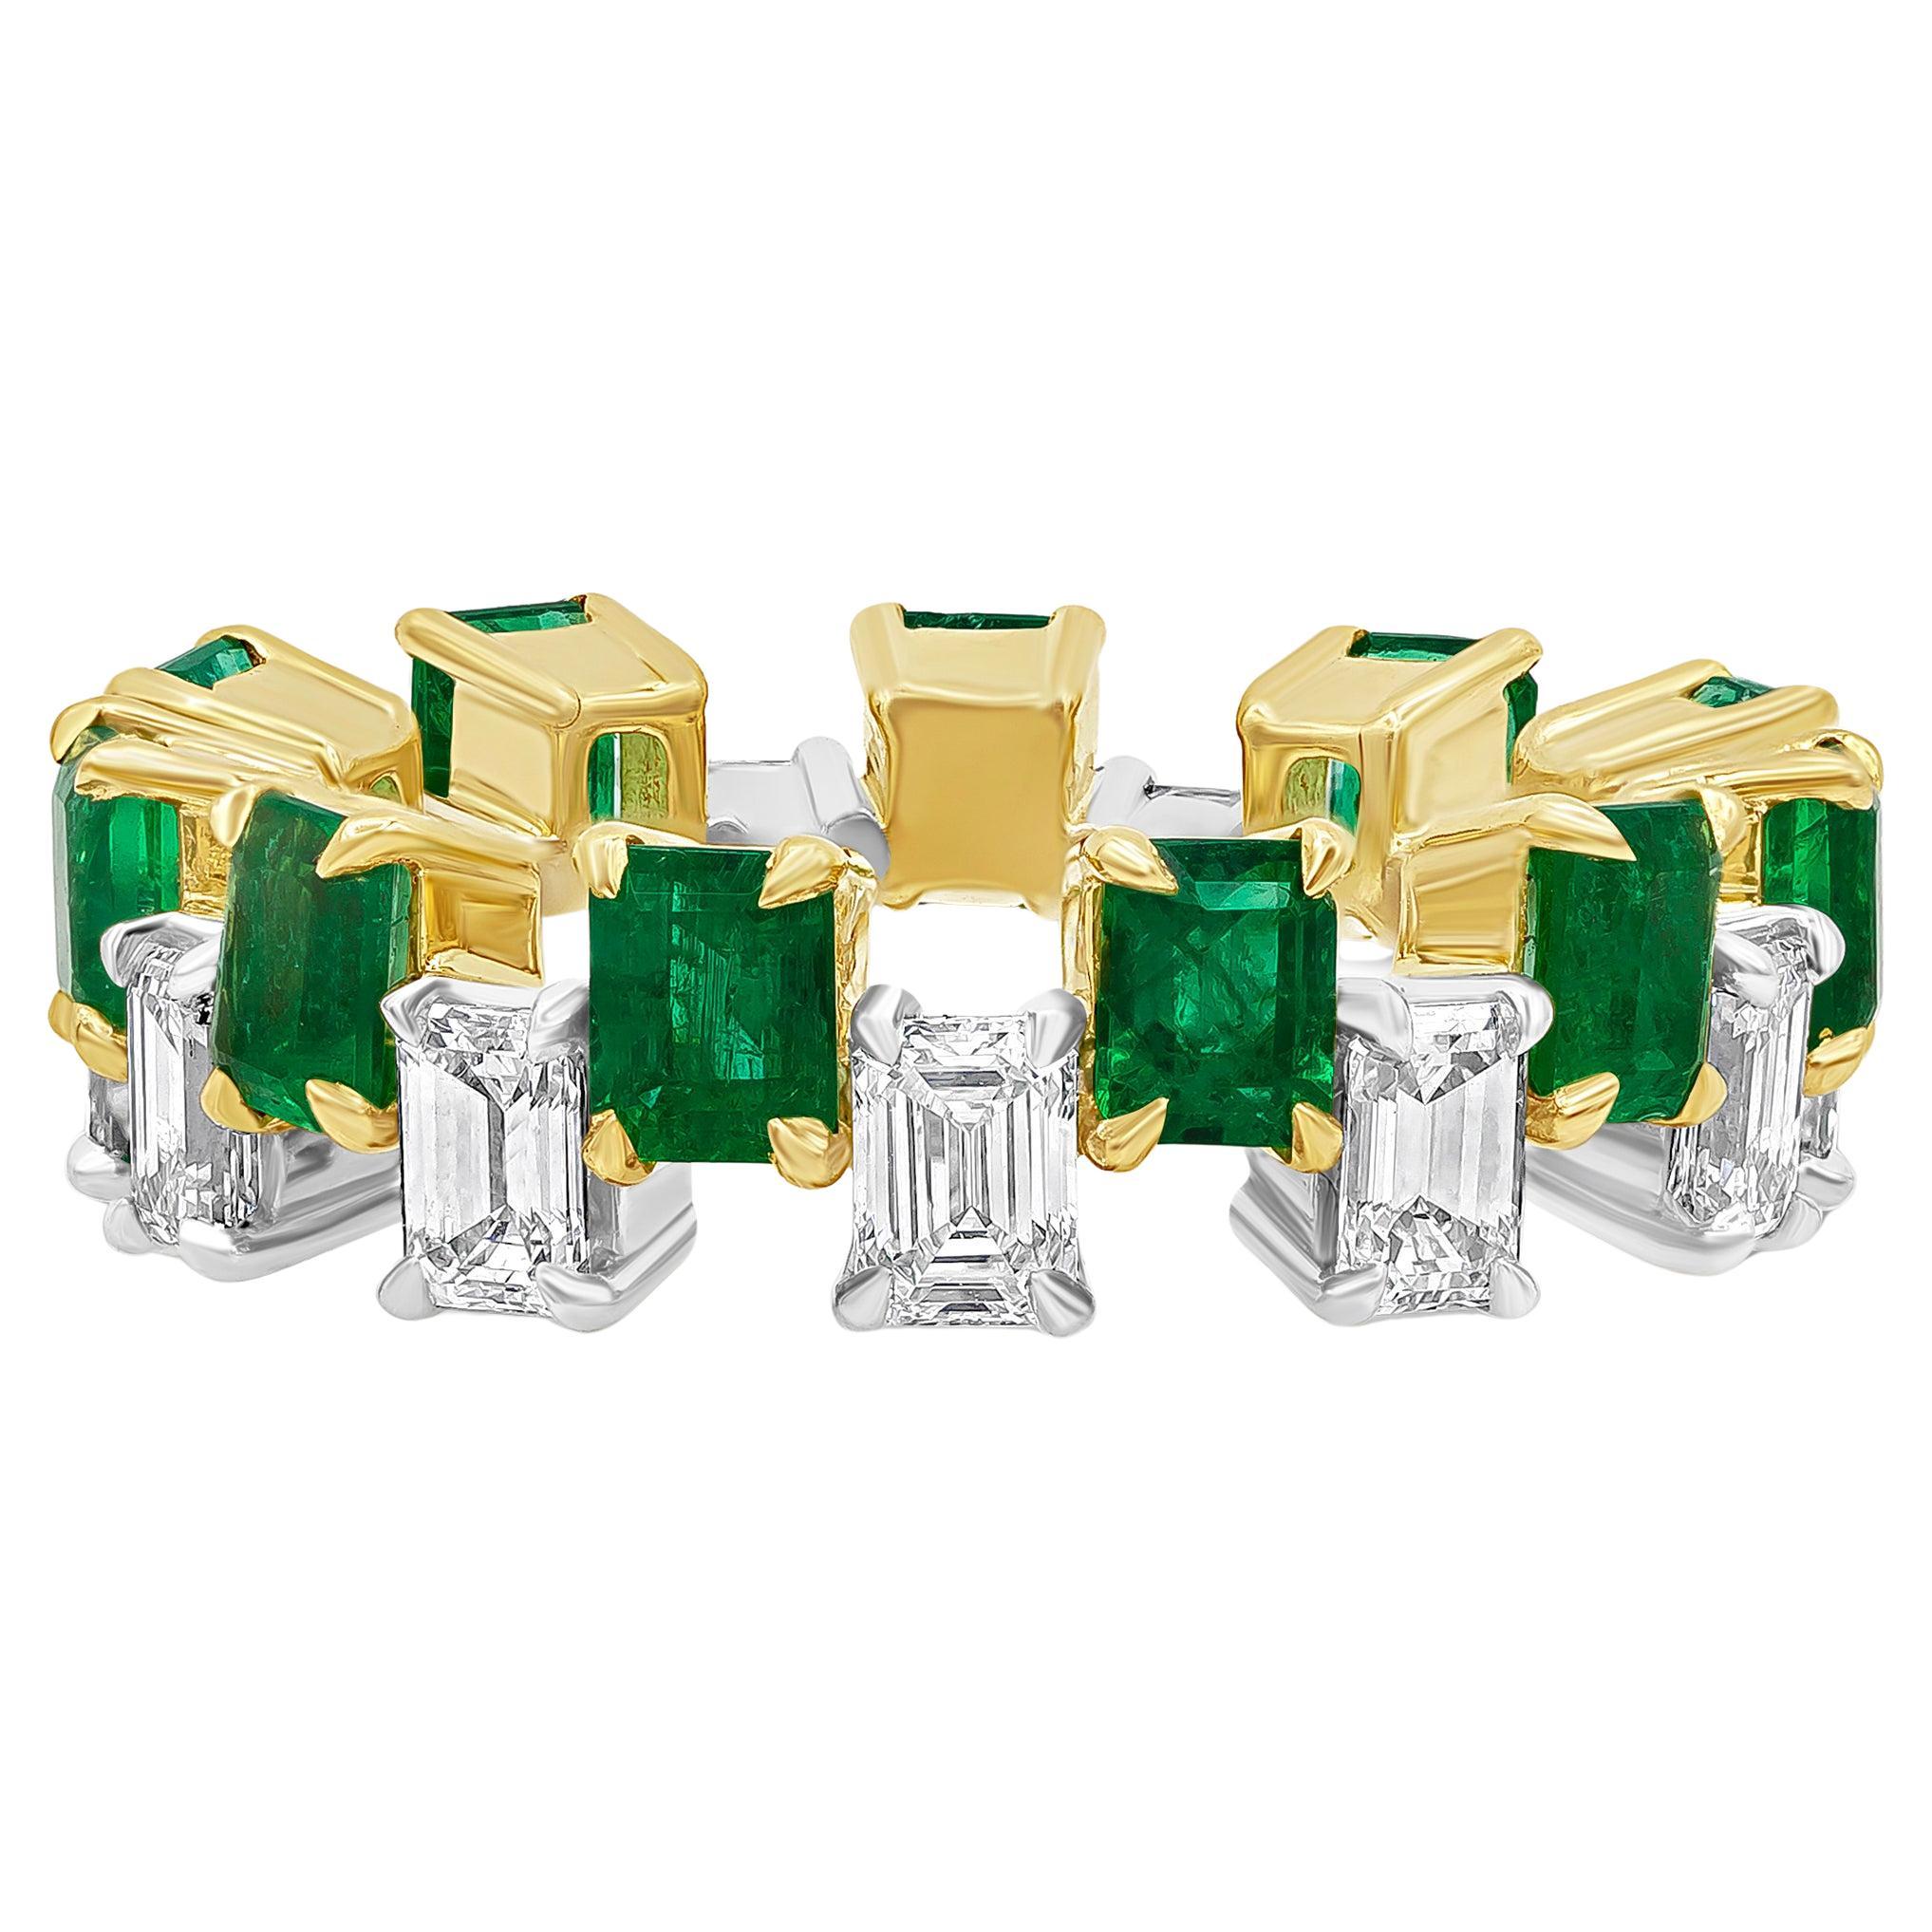 A uniquely-designed ring showcasing emerald cut green emeralds that elegantly alternate with emerald cut diamonds. Green emeralds weigh 2.67 carats total while diamonds weigh 2.27 carats total and are approximately G color, VS in clarity. Perfectly